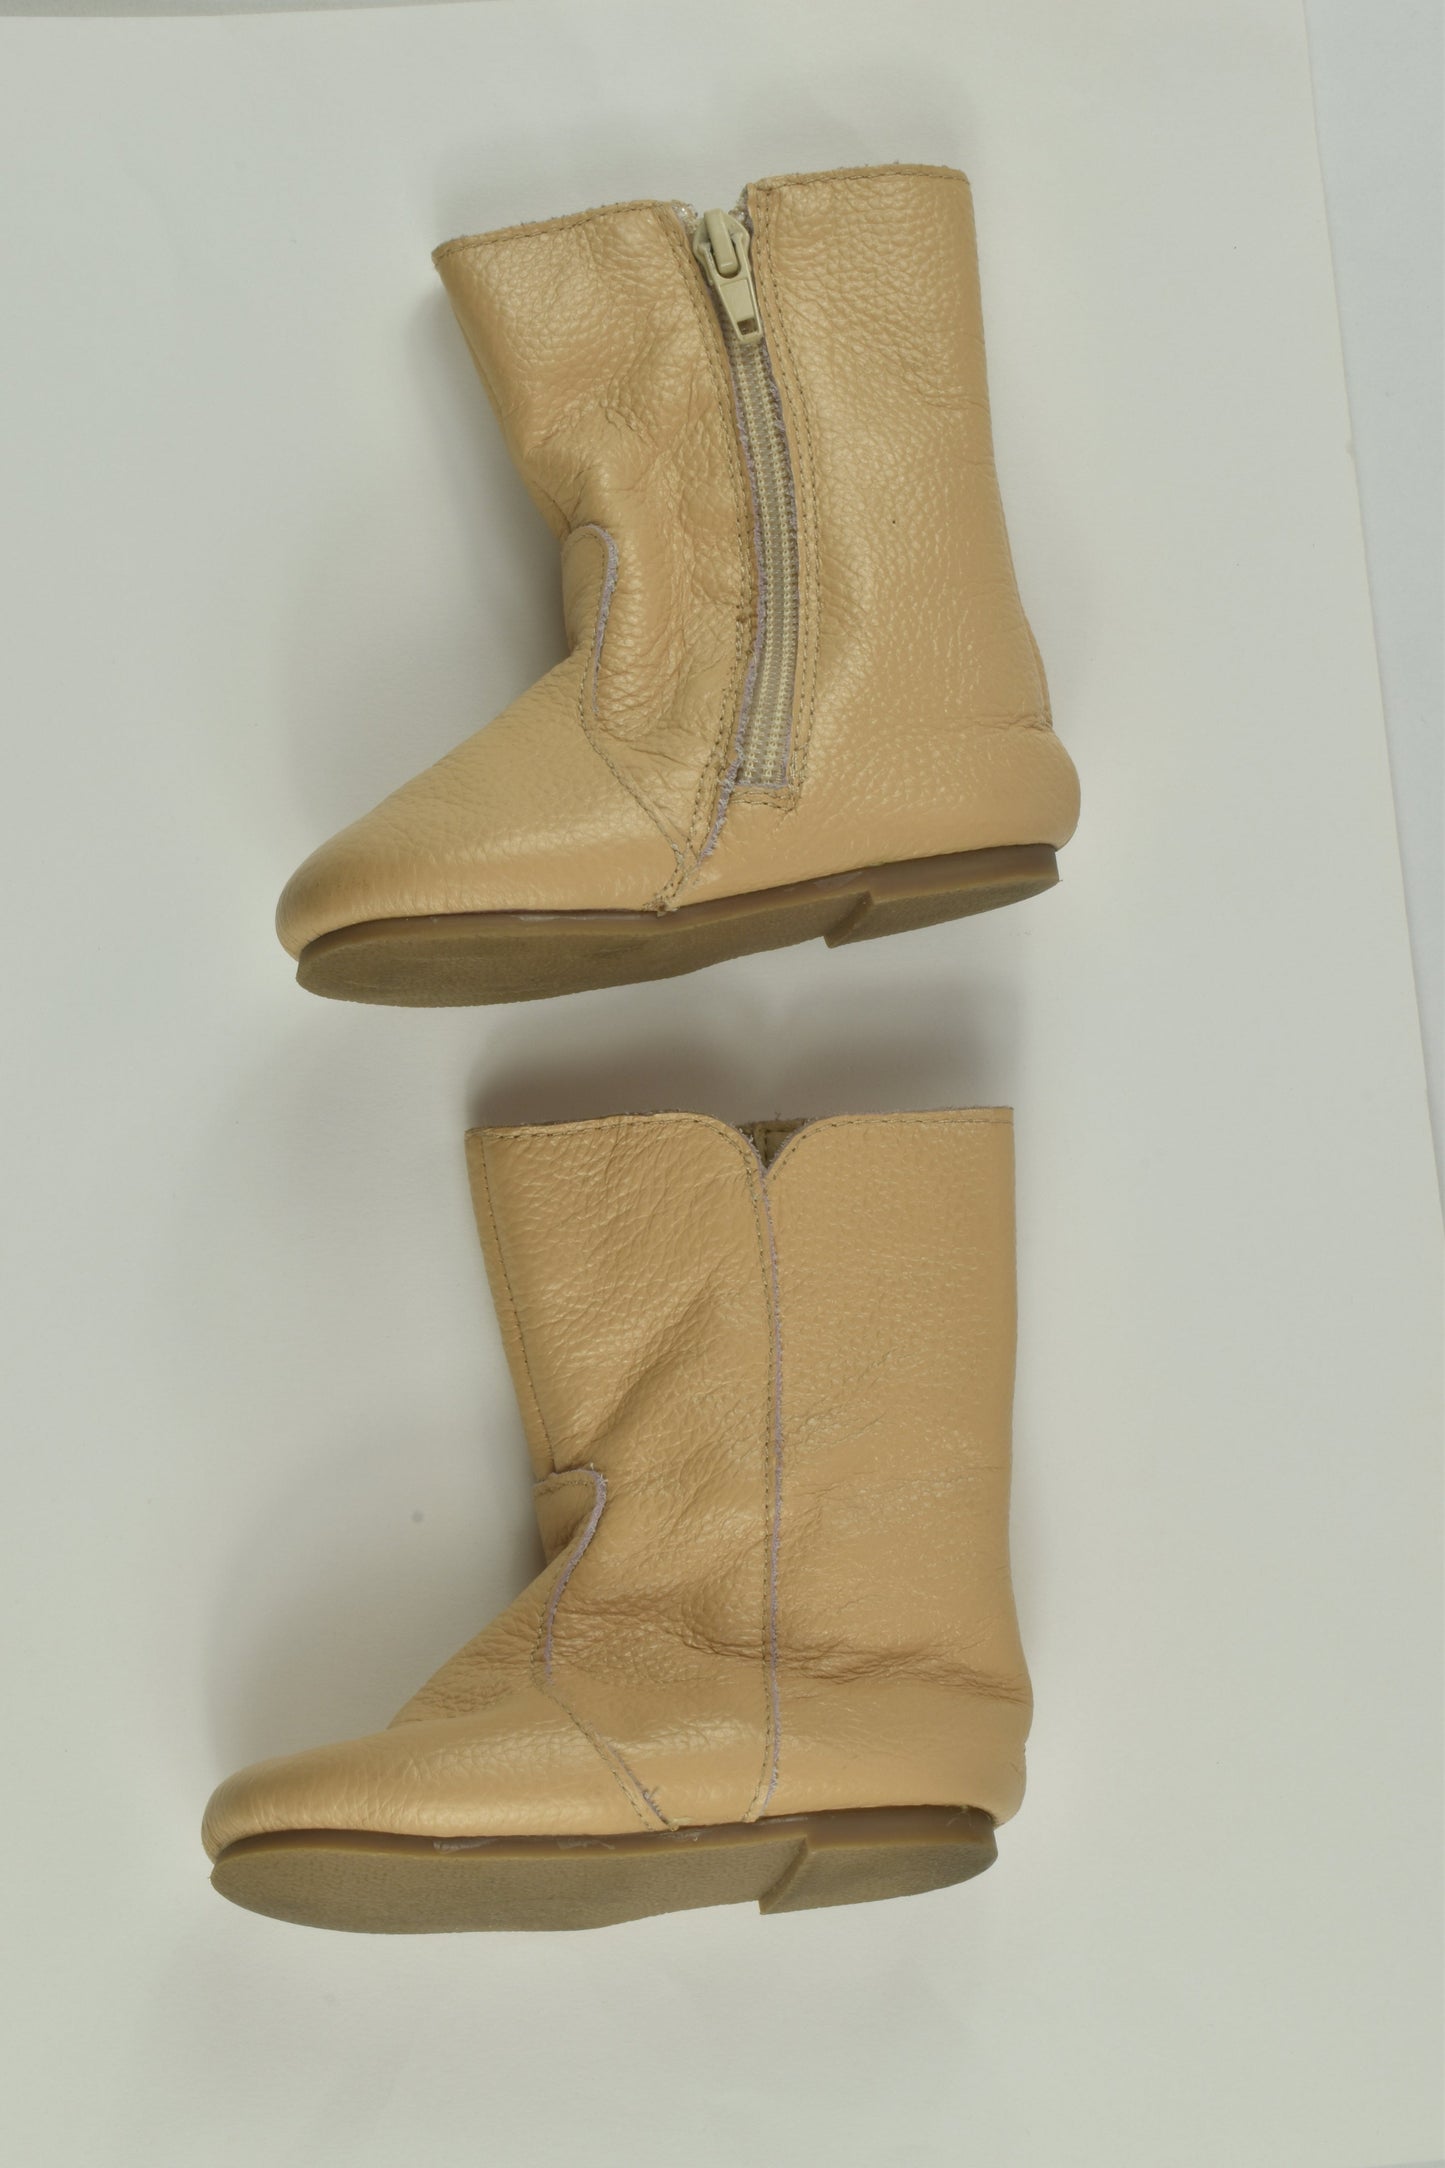 Brand Unknown Size approx 5 Leather Boots